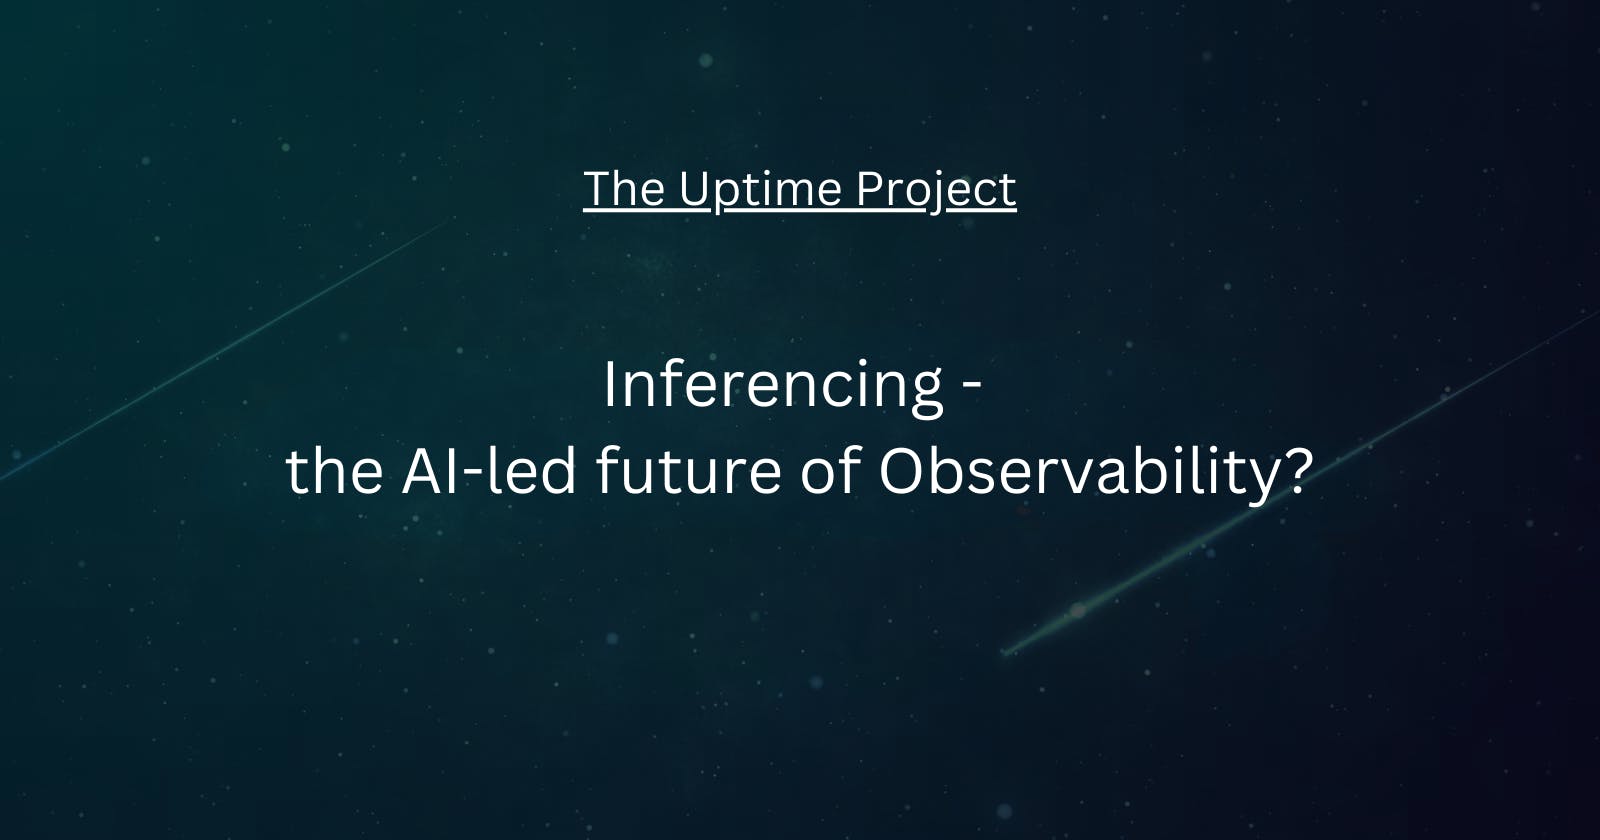 Inferencing - the AI-led future of Observability?